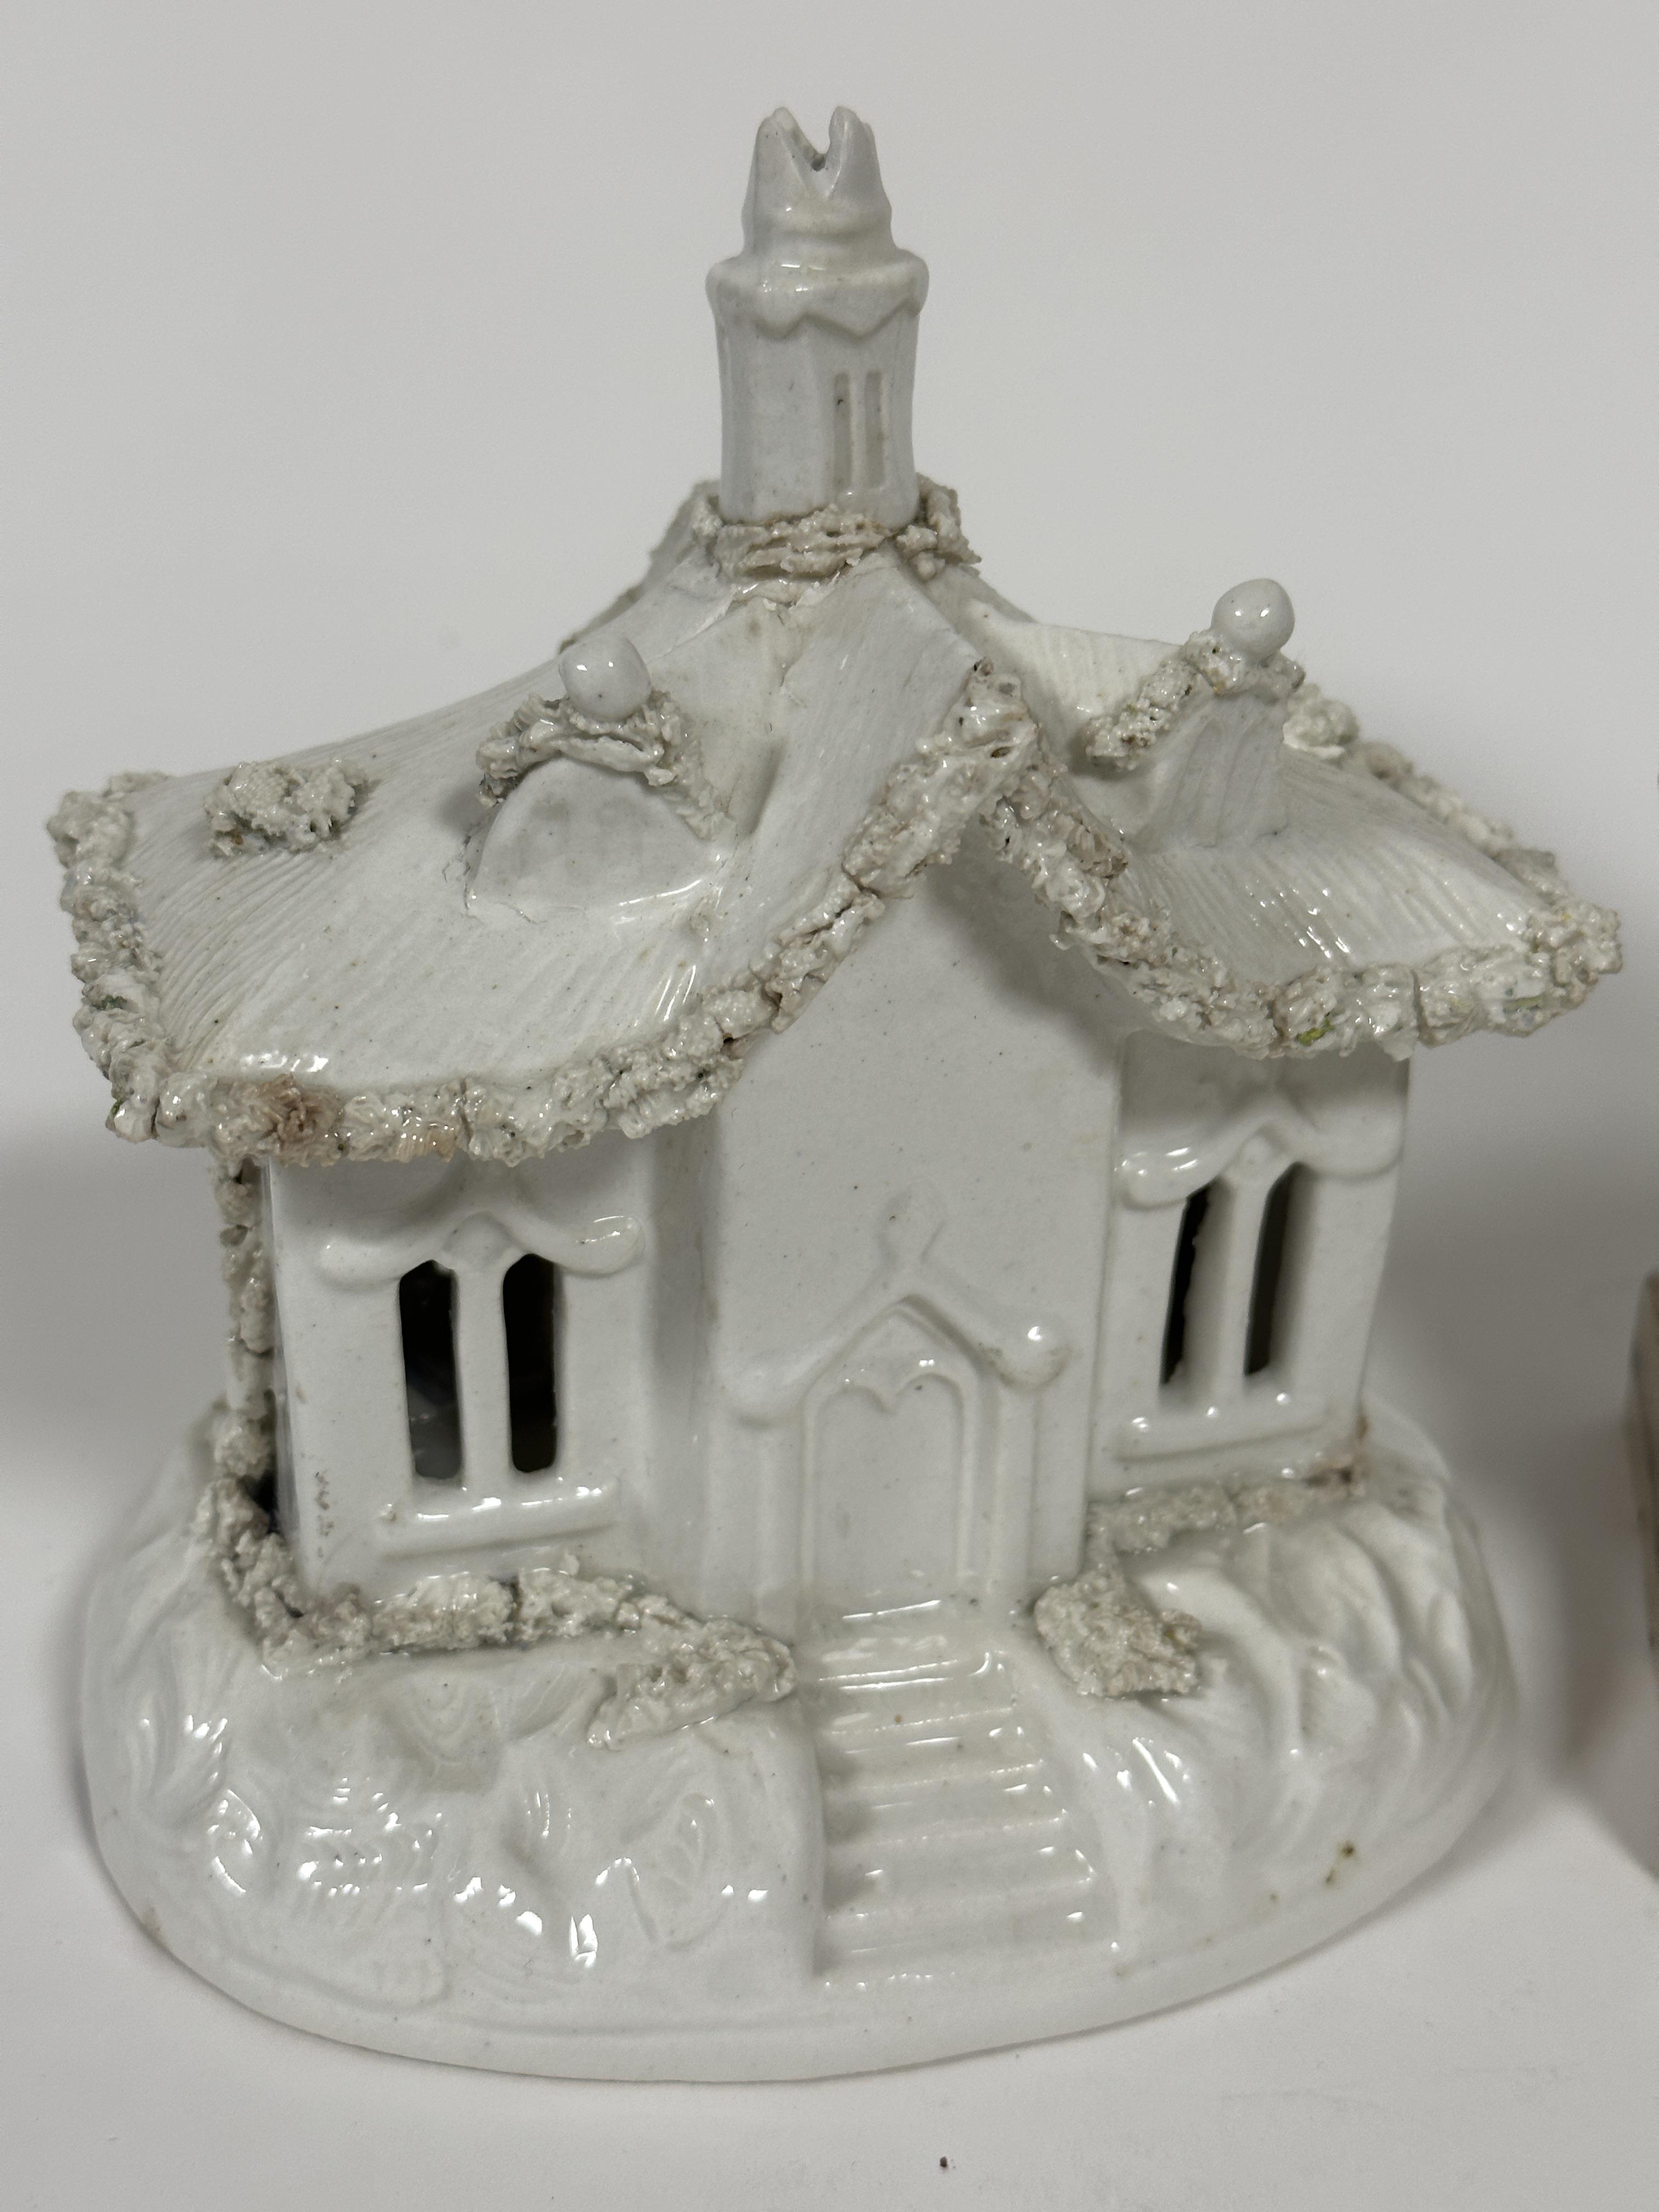 An early 19thc Pratt ware figure group of a courting couple, back a/f, lady holding a sheet of - Image 7 of 7